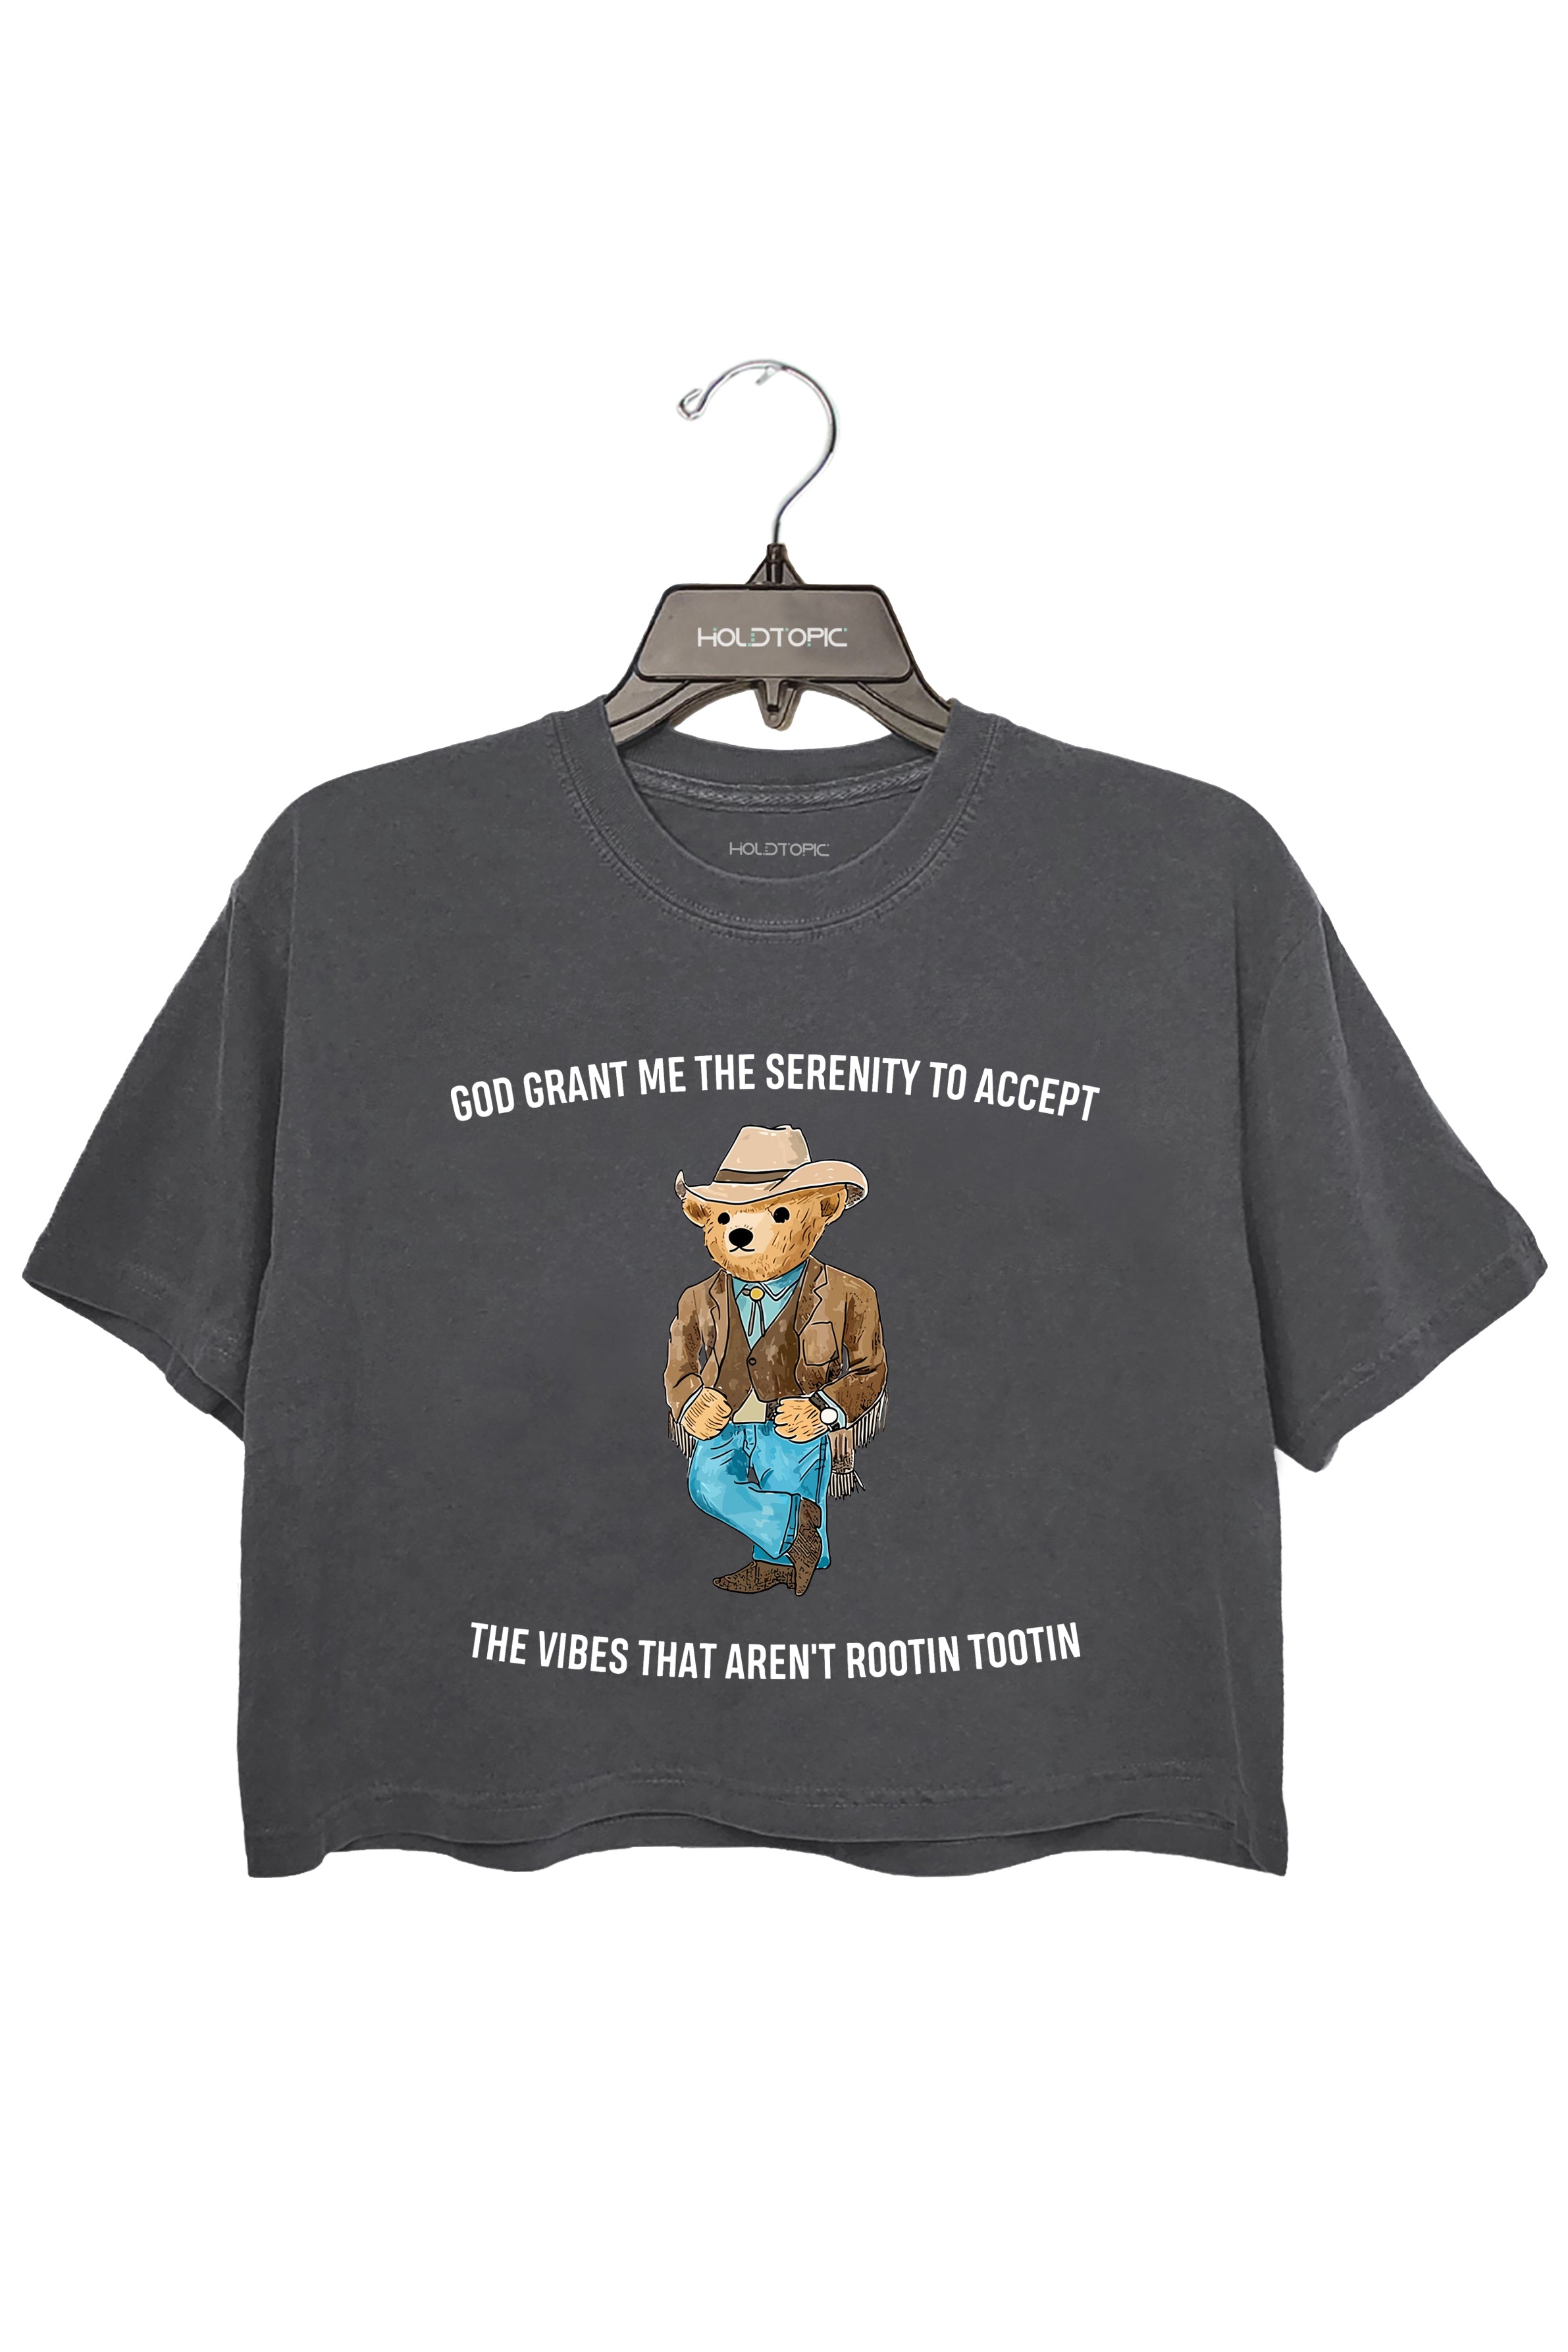 God Grant Me The Serenity To Accept The Vibes That Aren’t Rootin Tootin ,Serenity Bear Gray Crop Top For Women